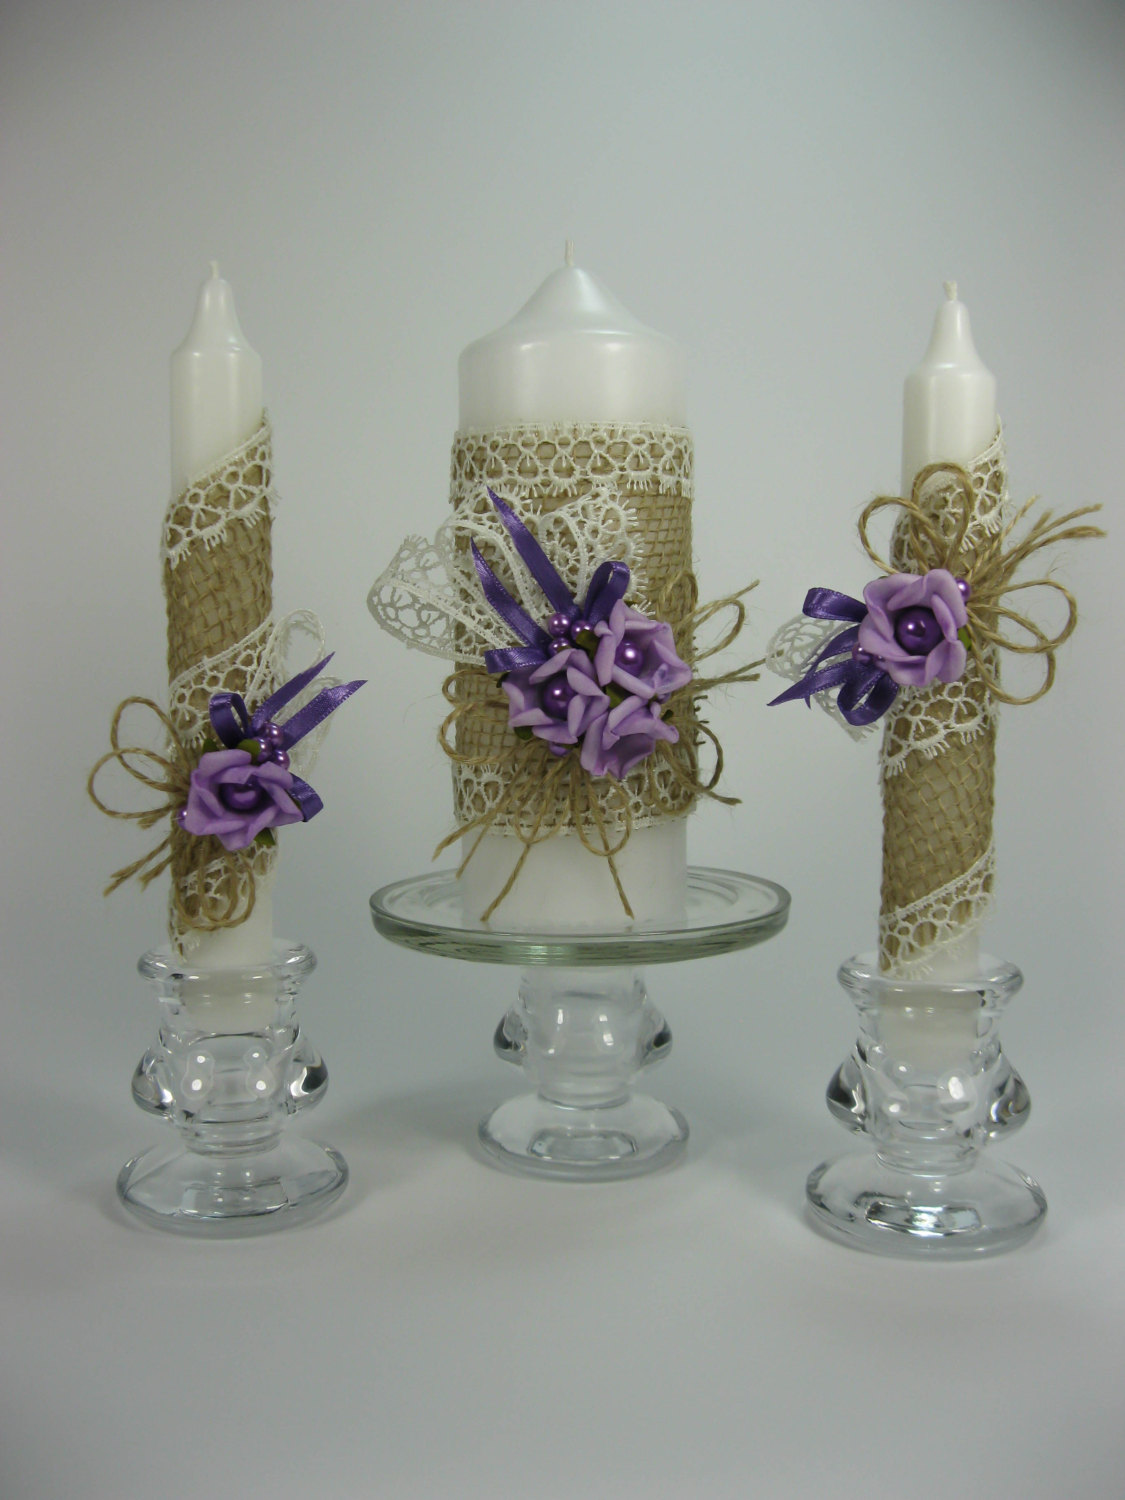 Rustic Wedding Unity Candles, Purple Roses, Pearls, Handmade Candles, Pillar Candle, Taper Candles, Personalized Candles, Unity Candle Set